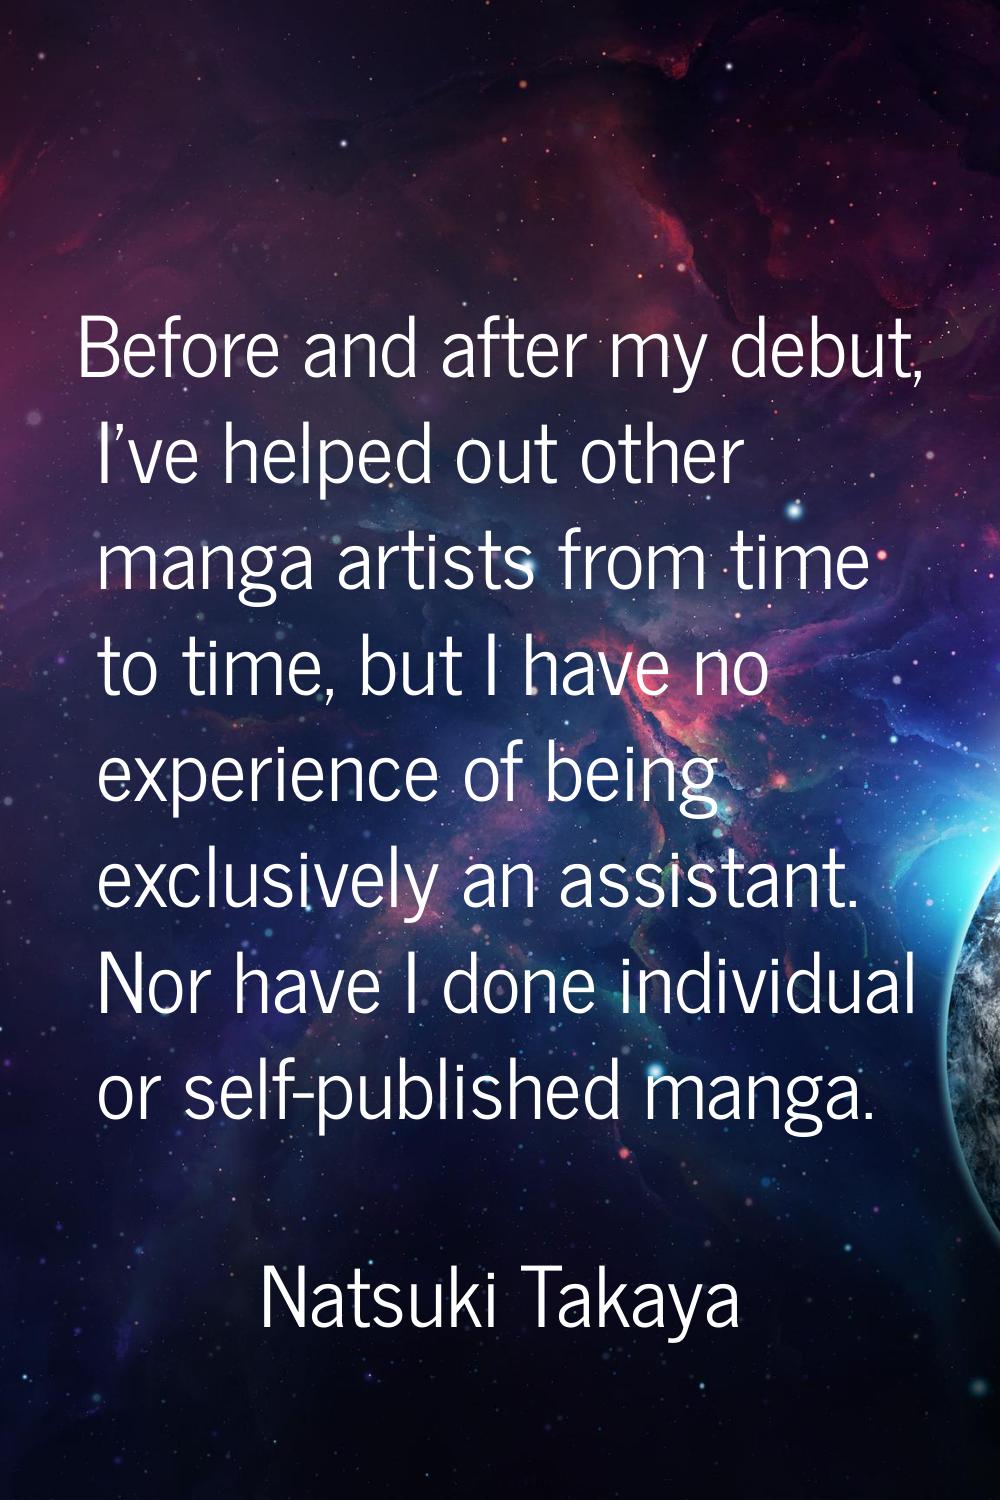 Before and after my debut, I've helped out other manga artists from time to time, but I have no exp